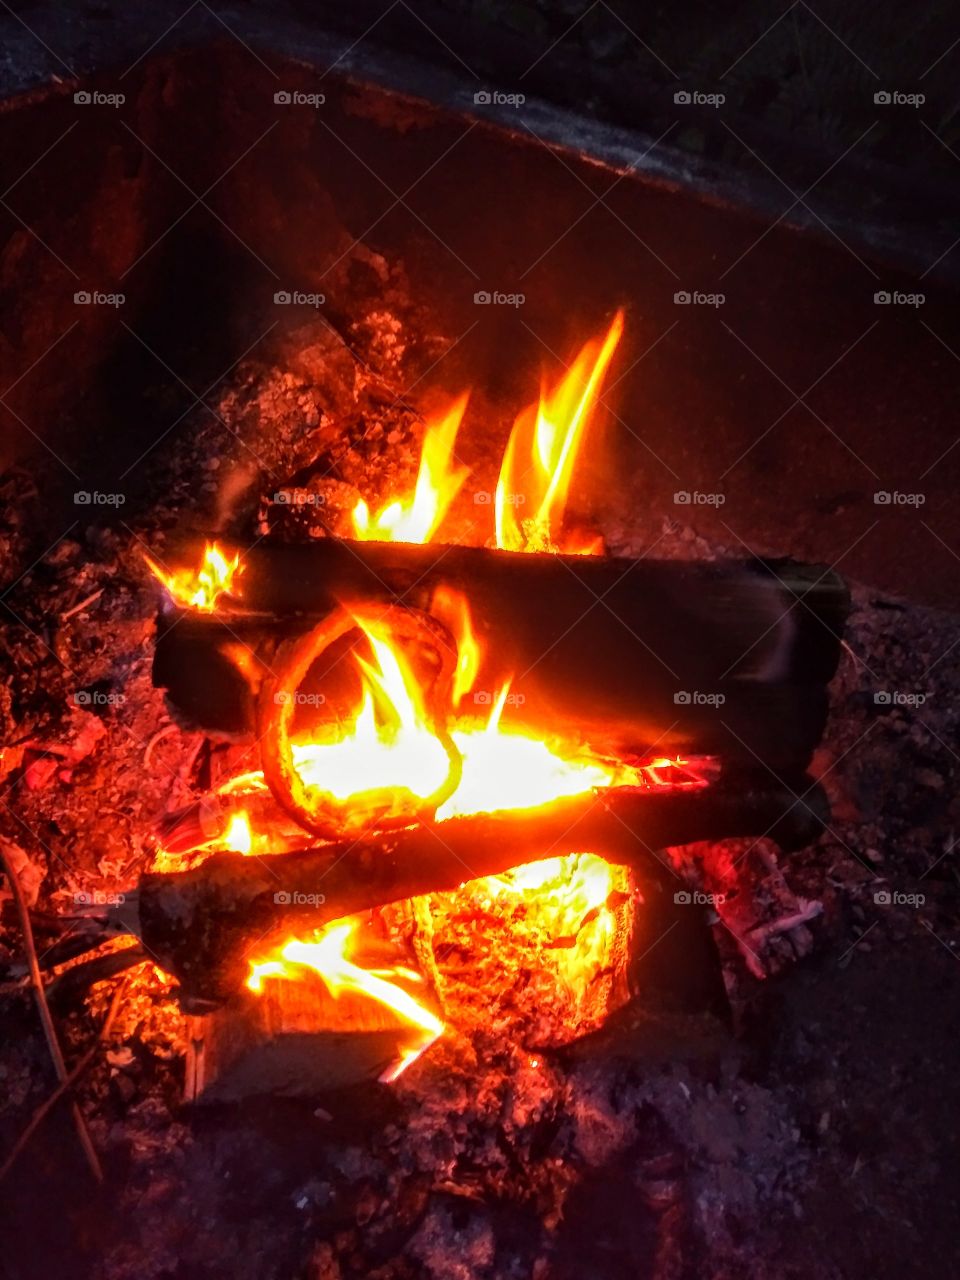 Night time shot of campfire